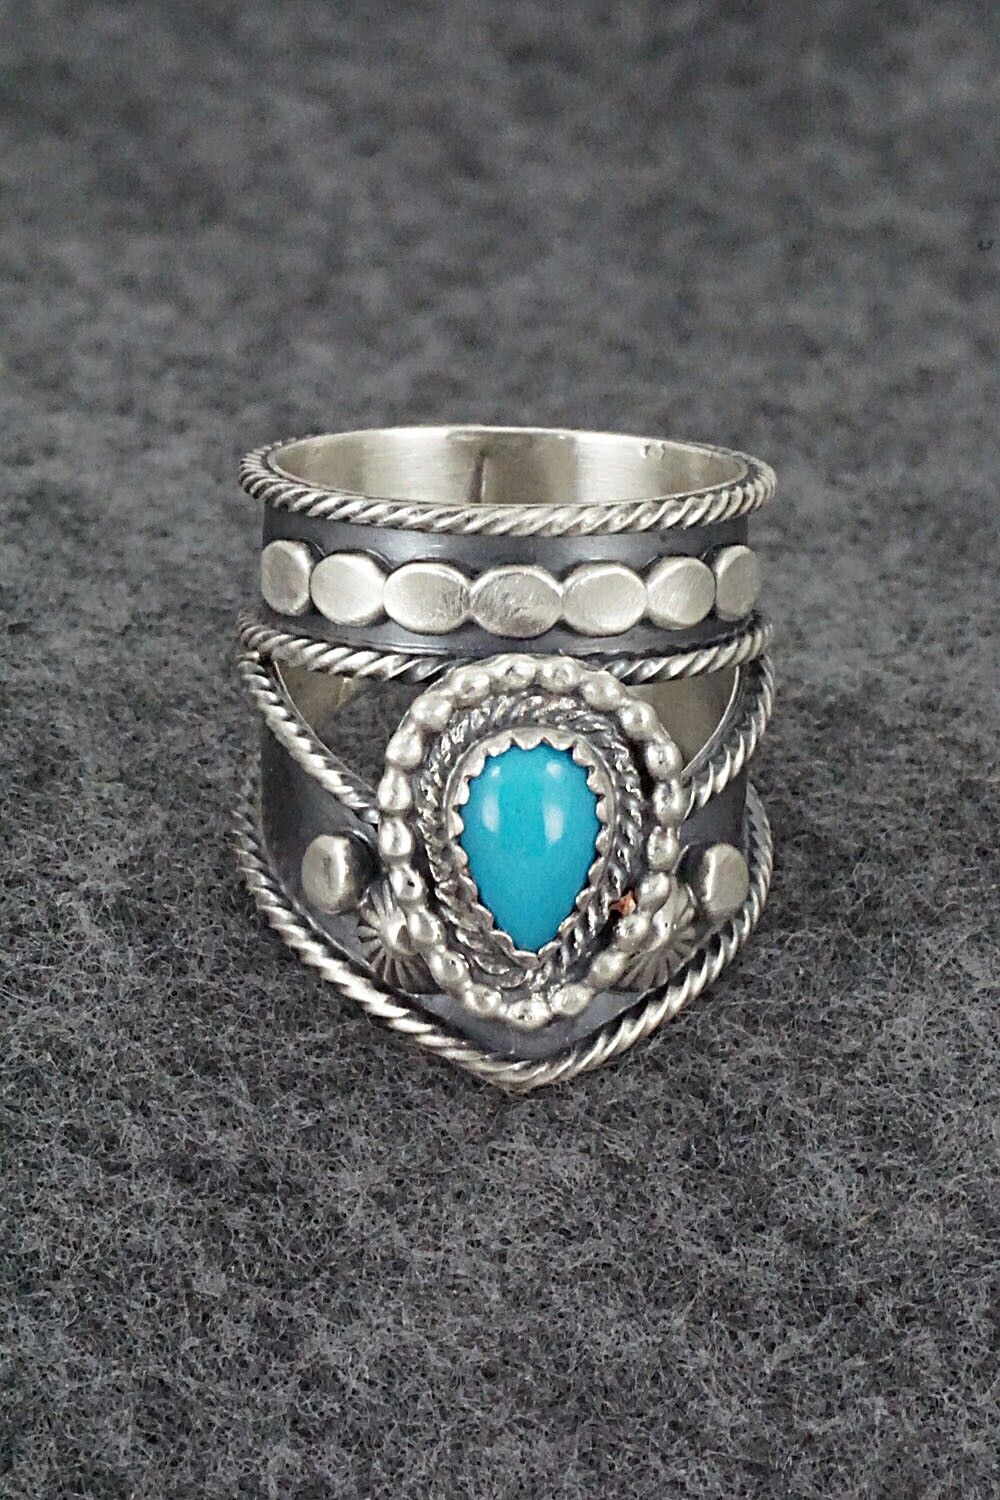 Turquoise & Sterling Silver Ring - Tom Lewis - Size 8